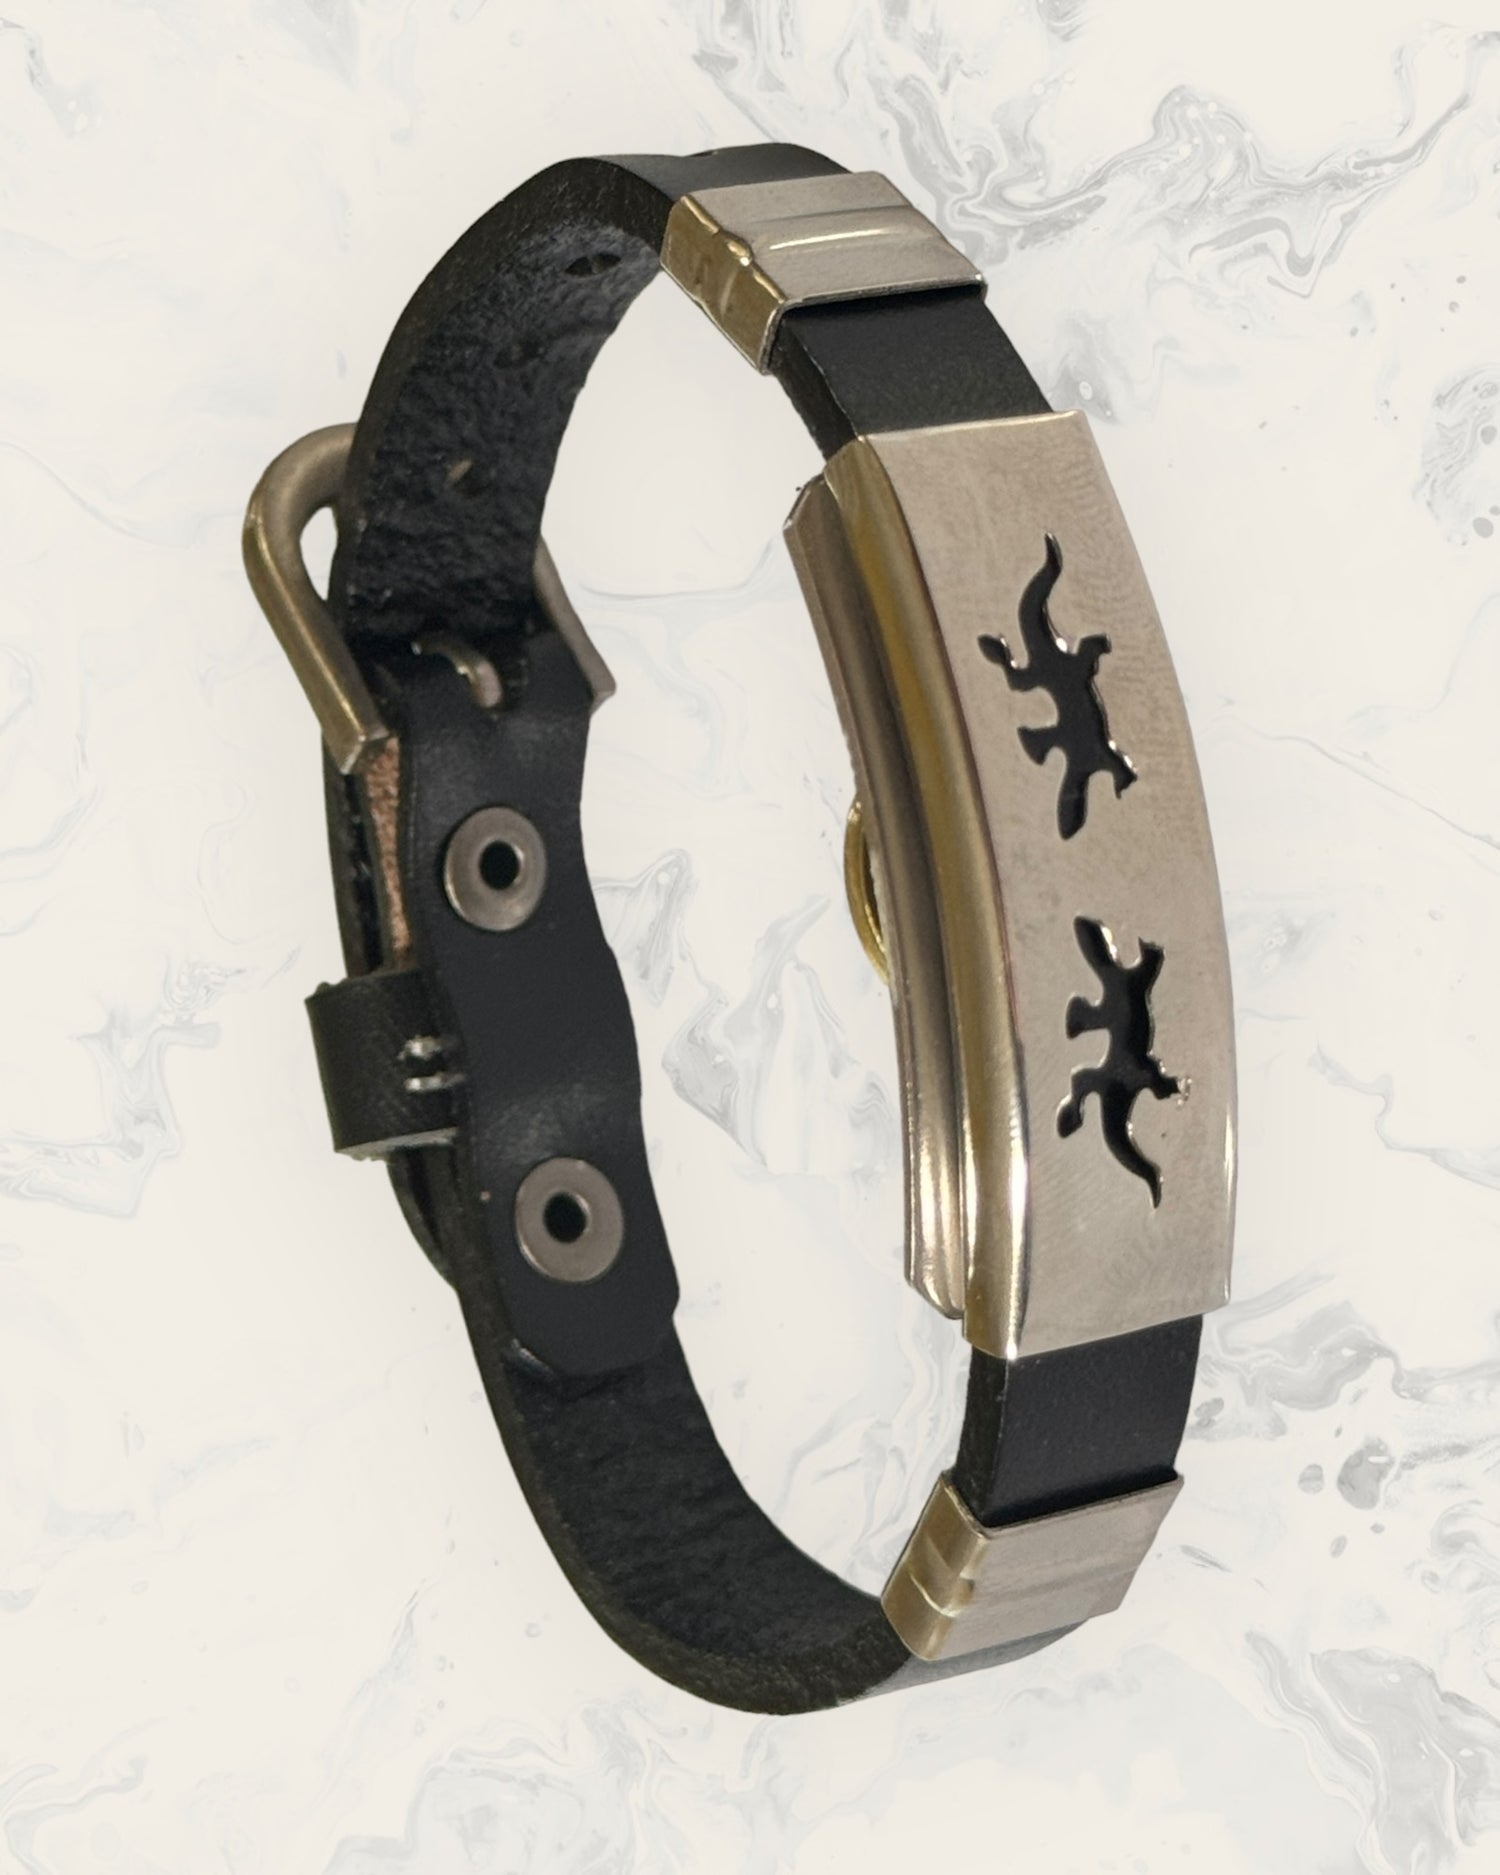 Natural Pain Relief and EMF Protection Bracelet Leather Band Color Black with Two Geckos design on a silver metal slider